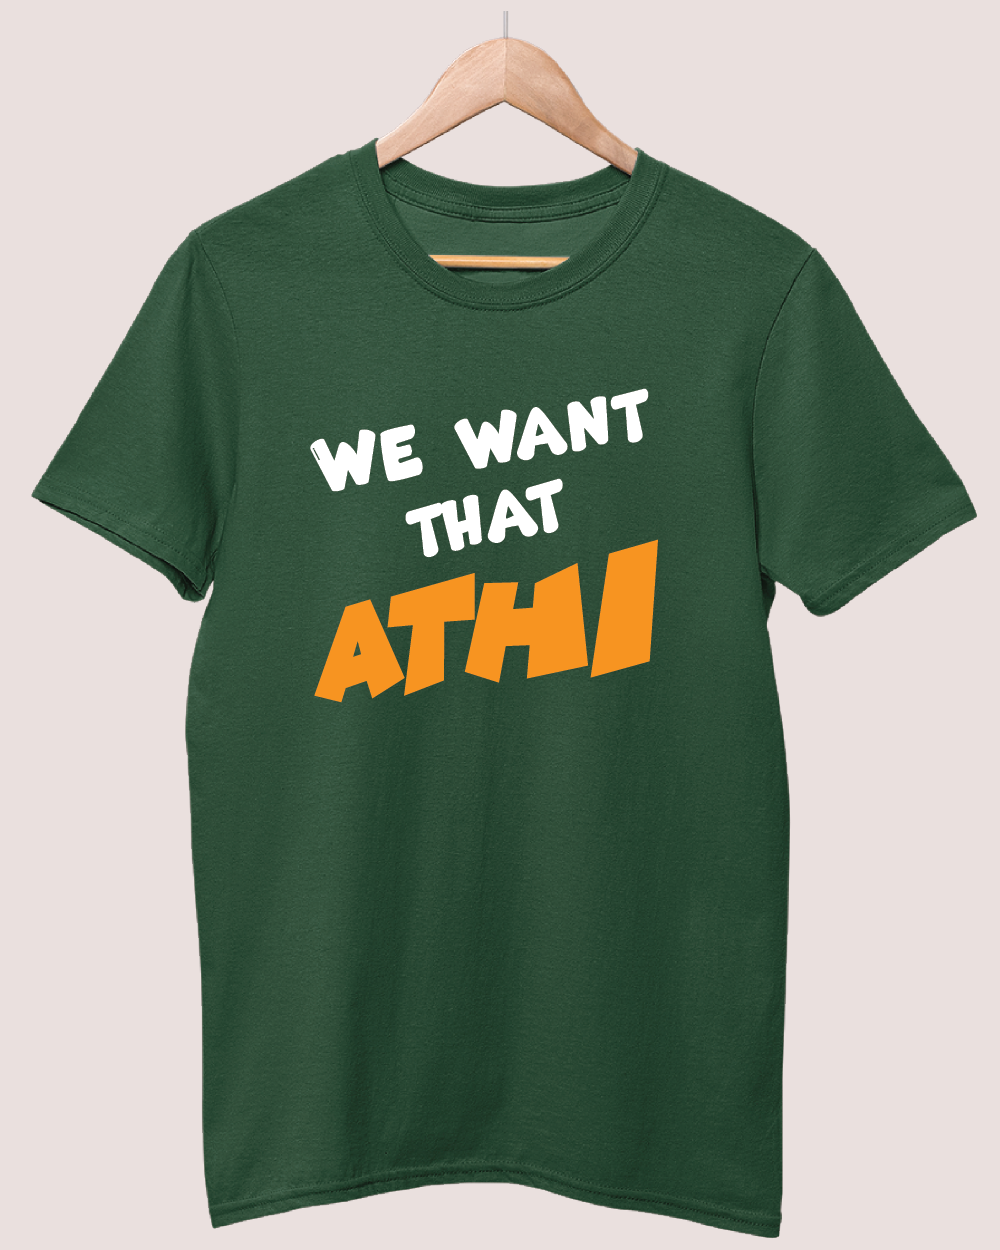 We want that athi 1 T-shirt